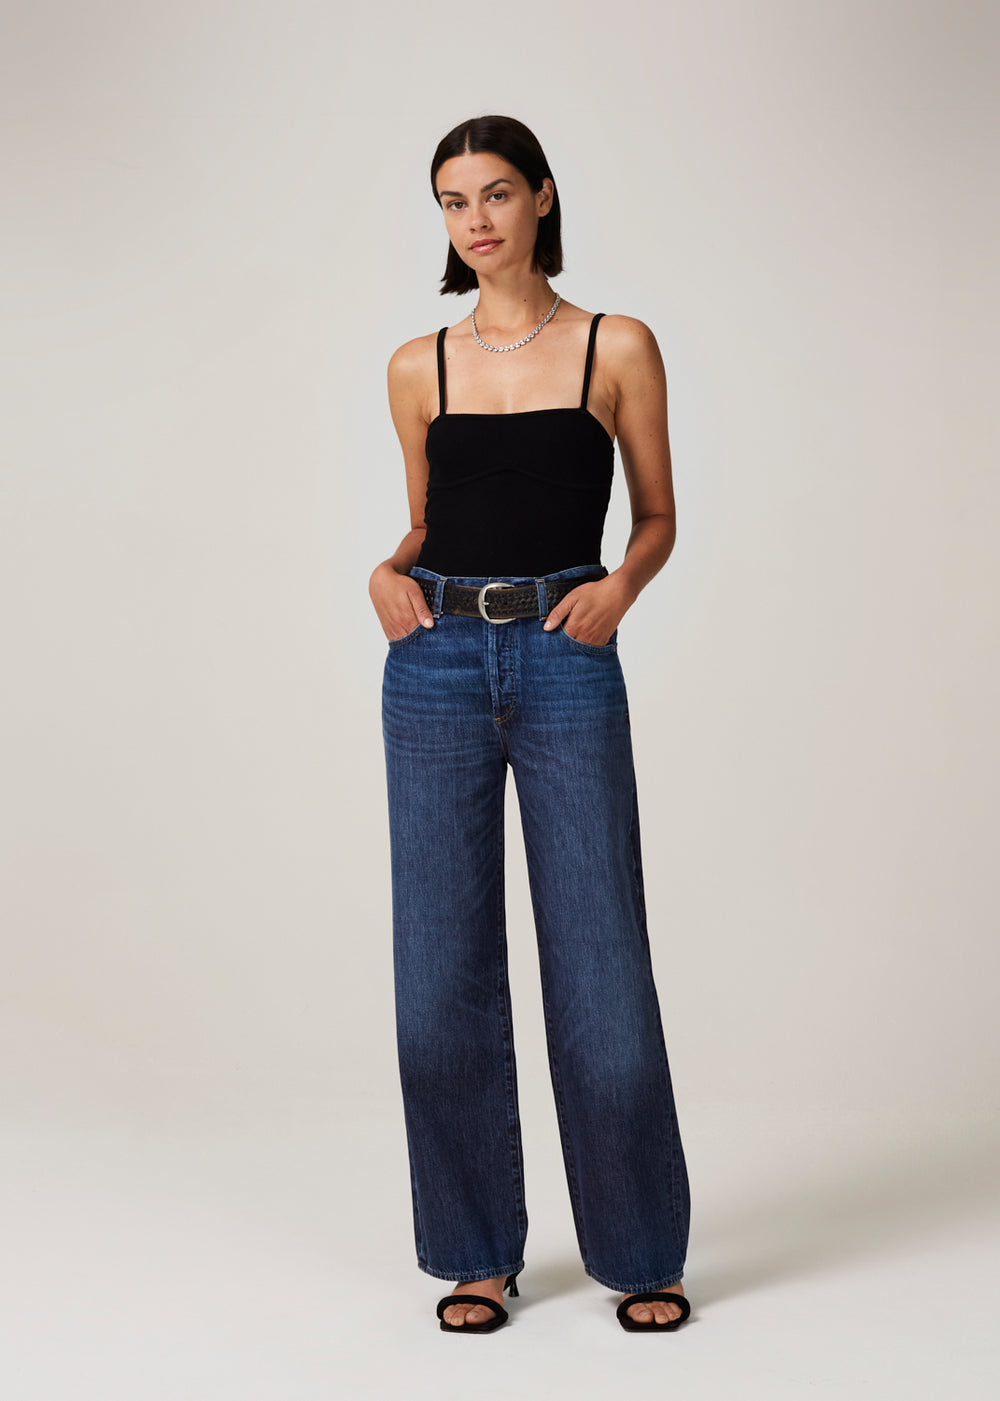 Womens Jeans in Womens Clothing - Walmart.com